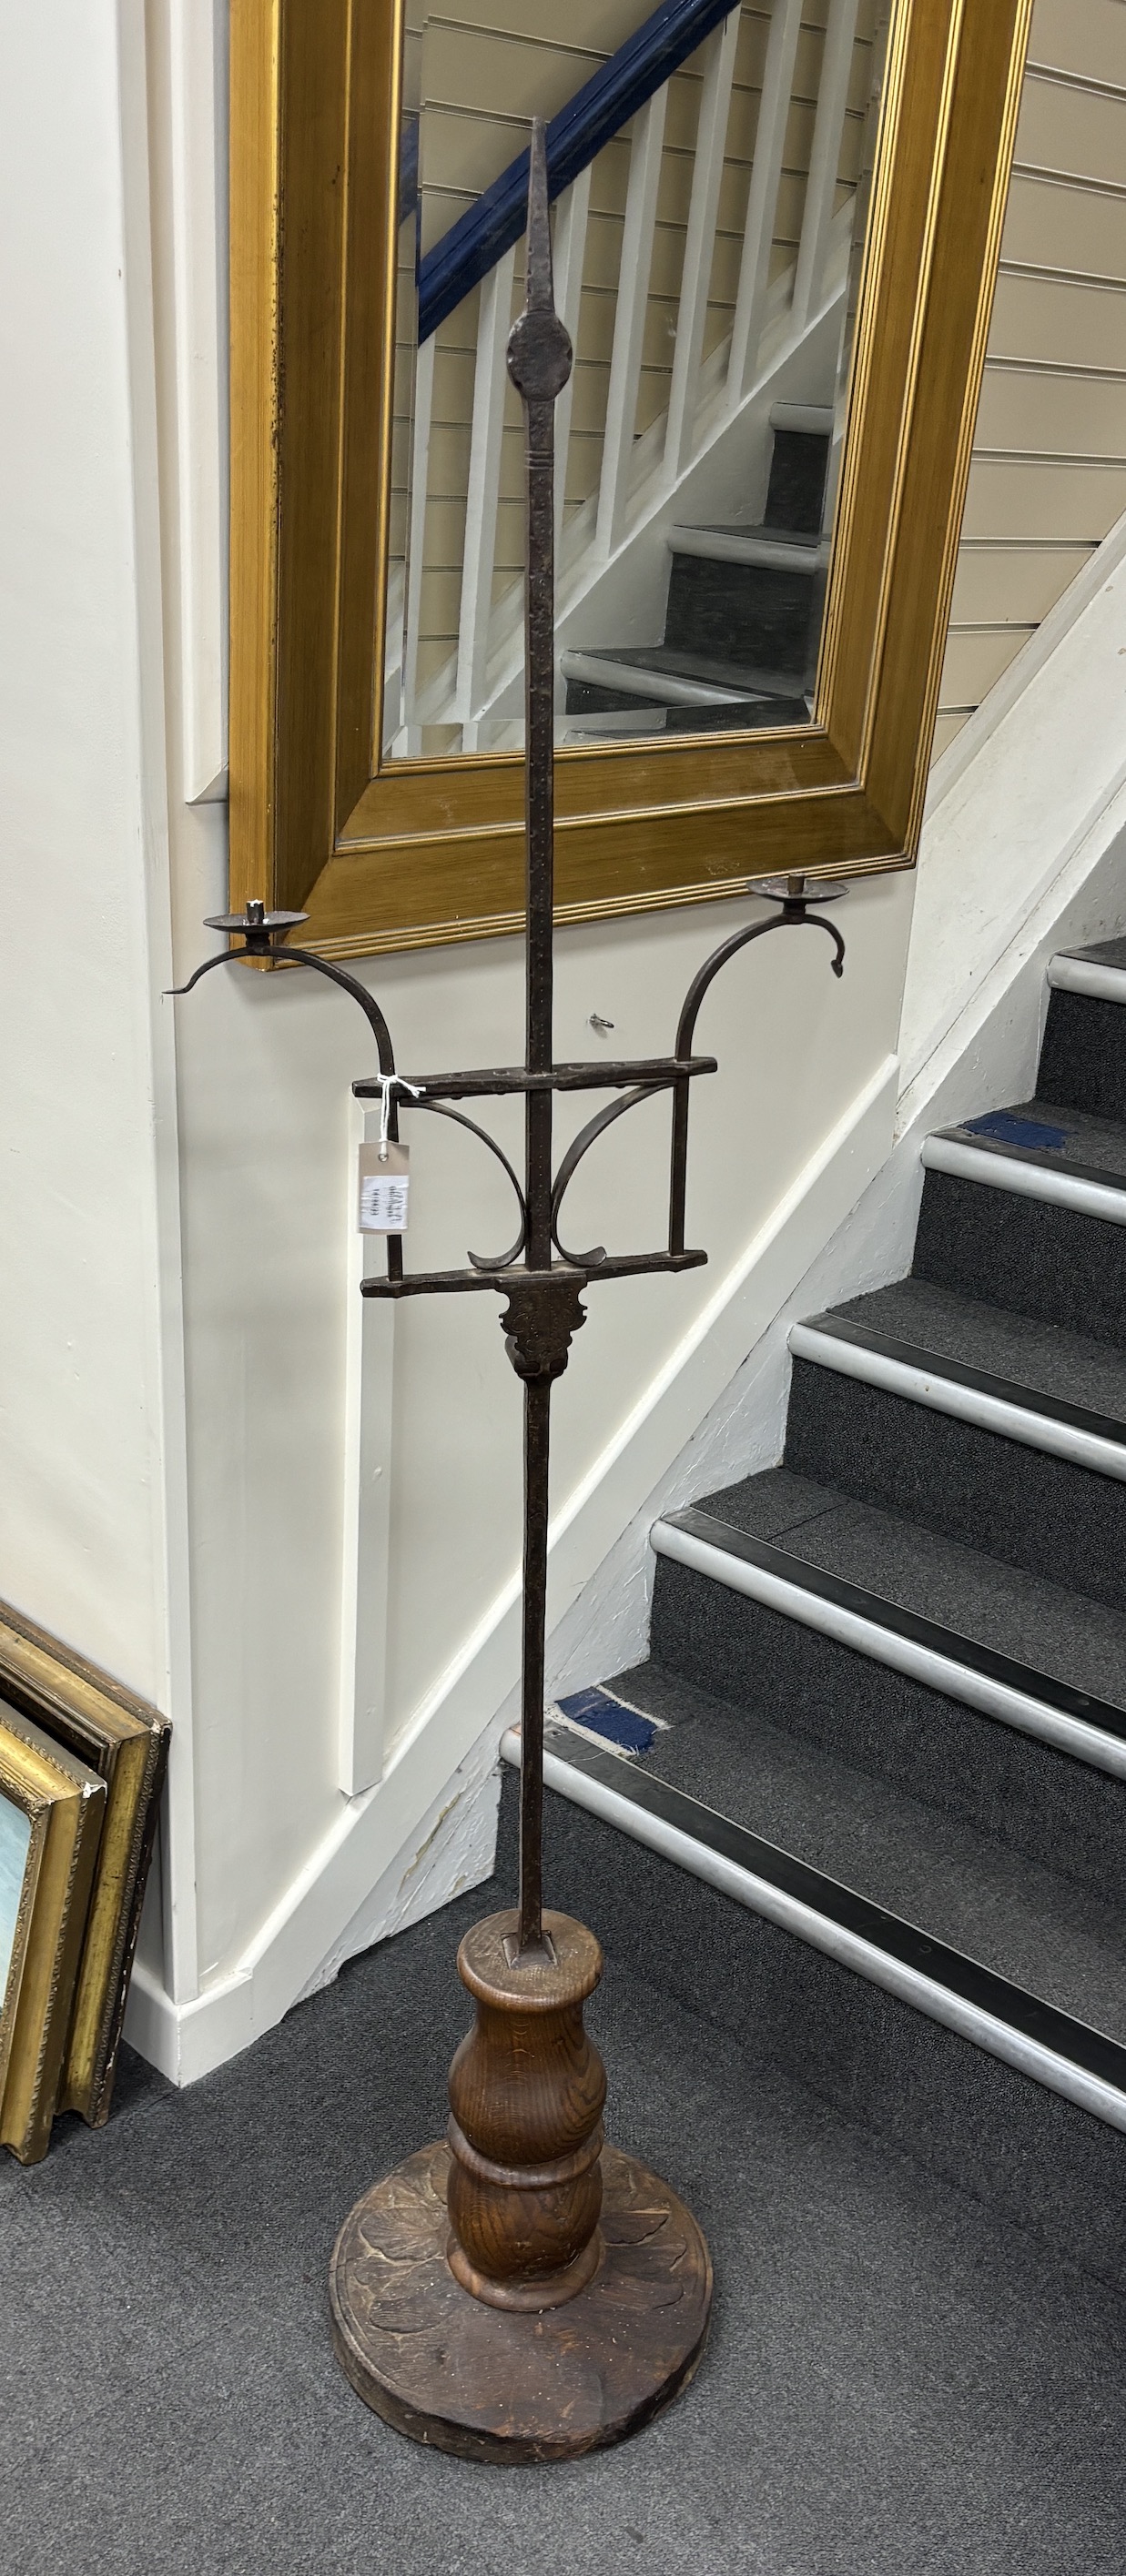 A wrought iron twin branch floor standing candelabra, with oak base, height 174cm, Provenance- Brede Place, East Sussex, a former residence of the Frewen family from 1712-1936.